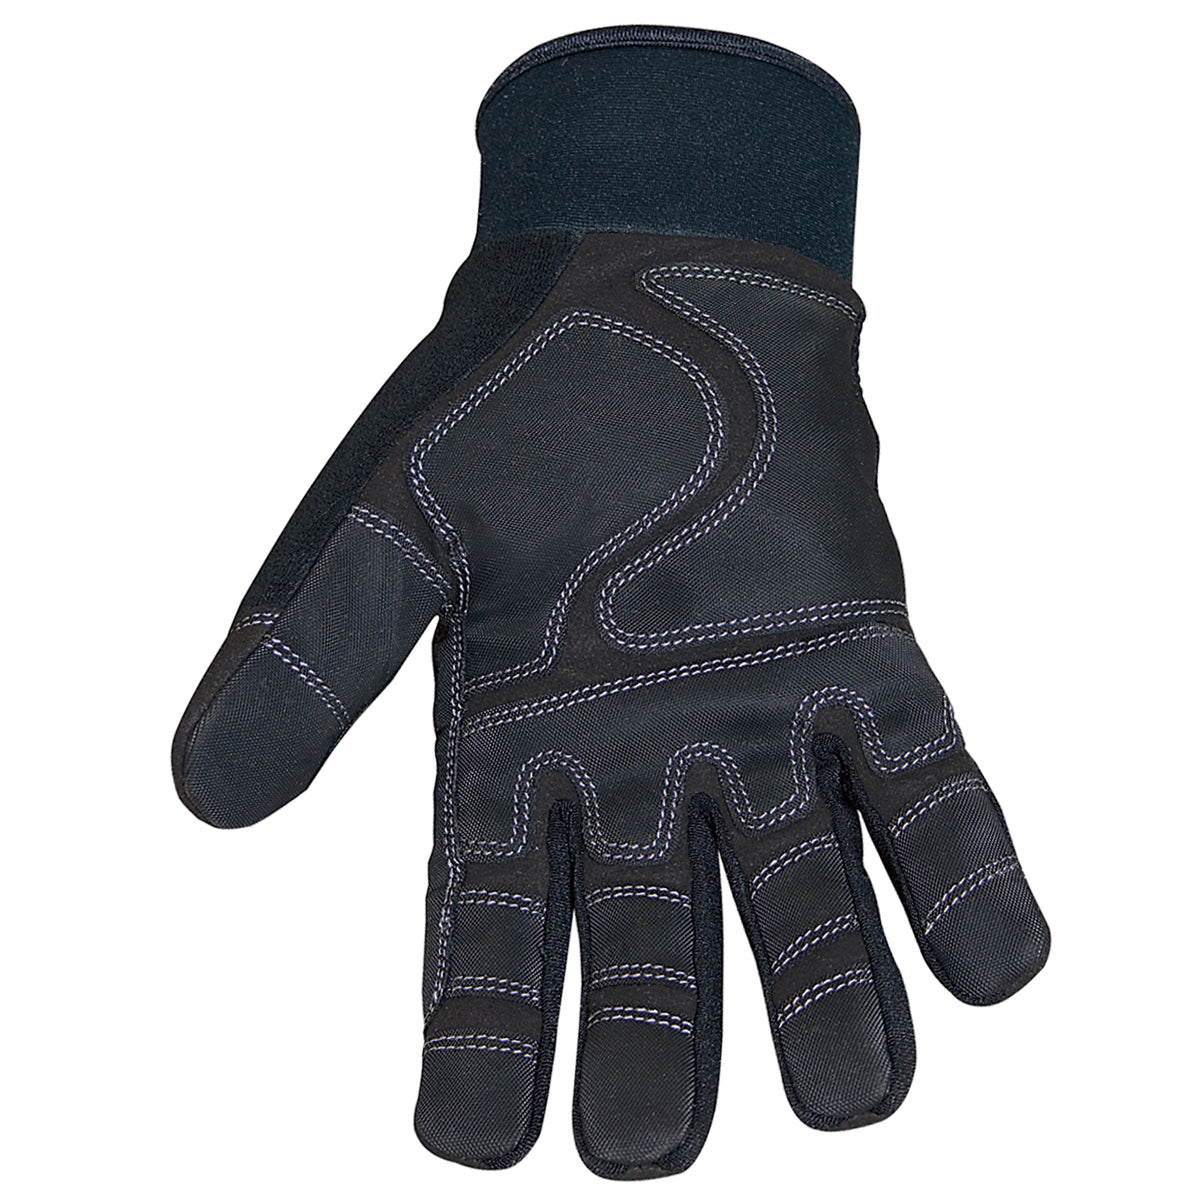 Large Winter Utility Gloves with Thinsulate Liner